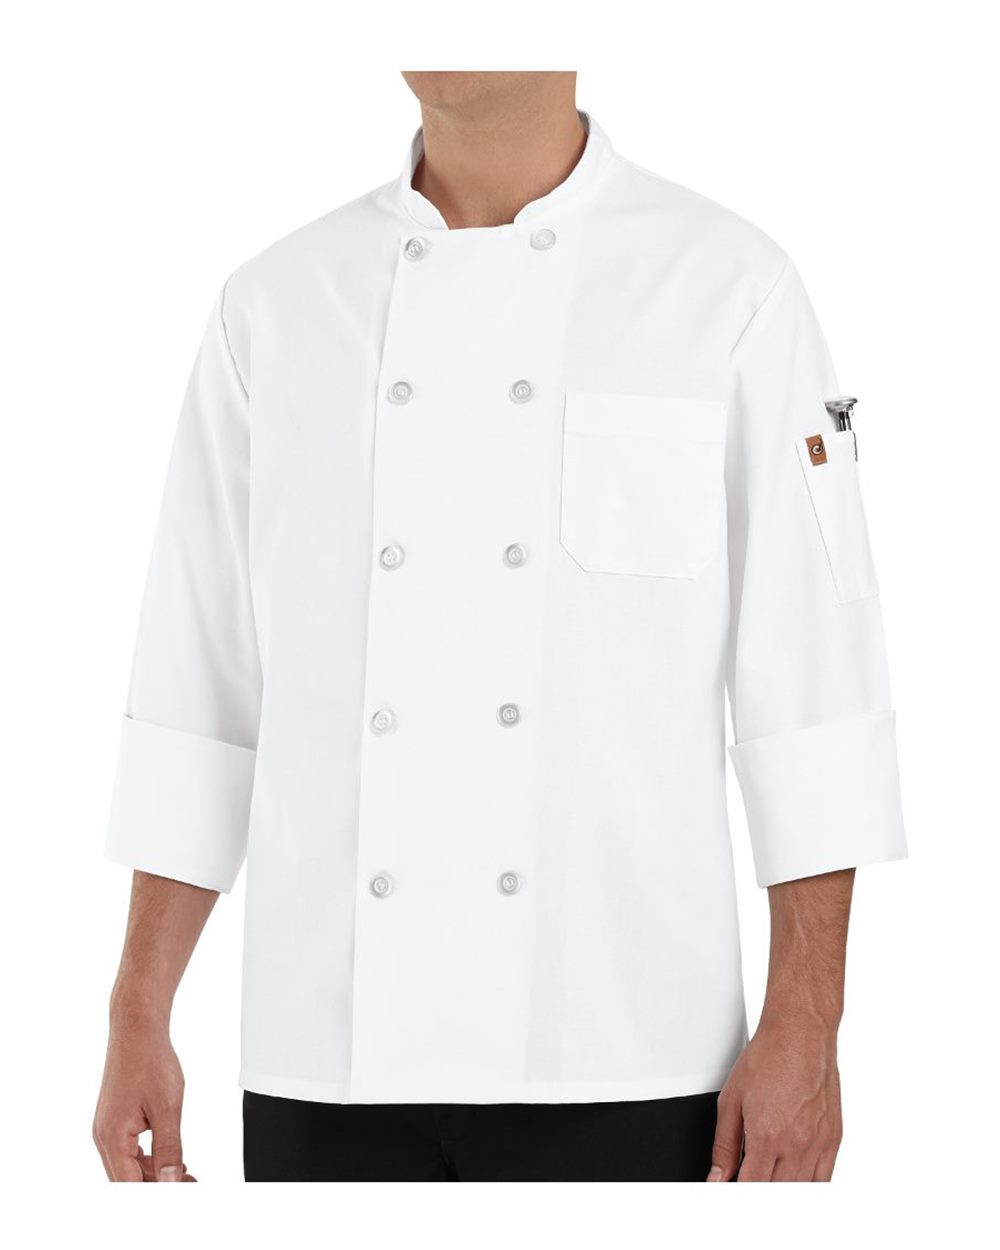 100% Polyester Ten Pearl Button Chef Coat Long Sizes-Chef Designs